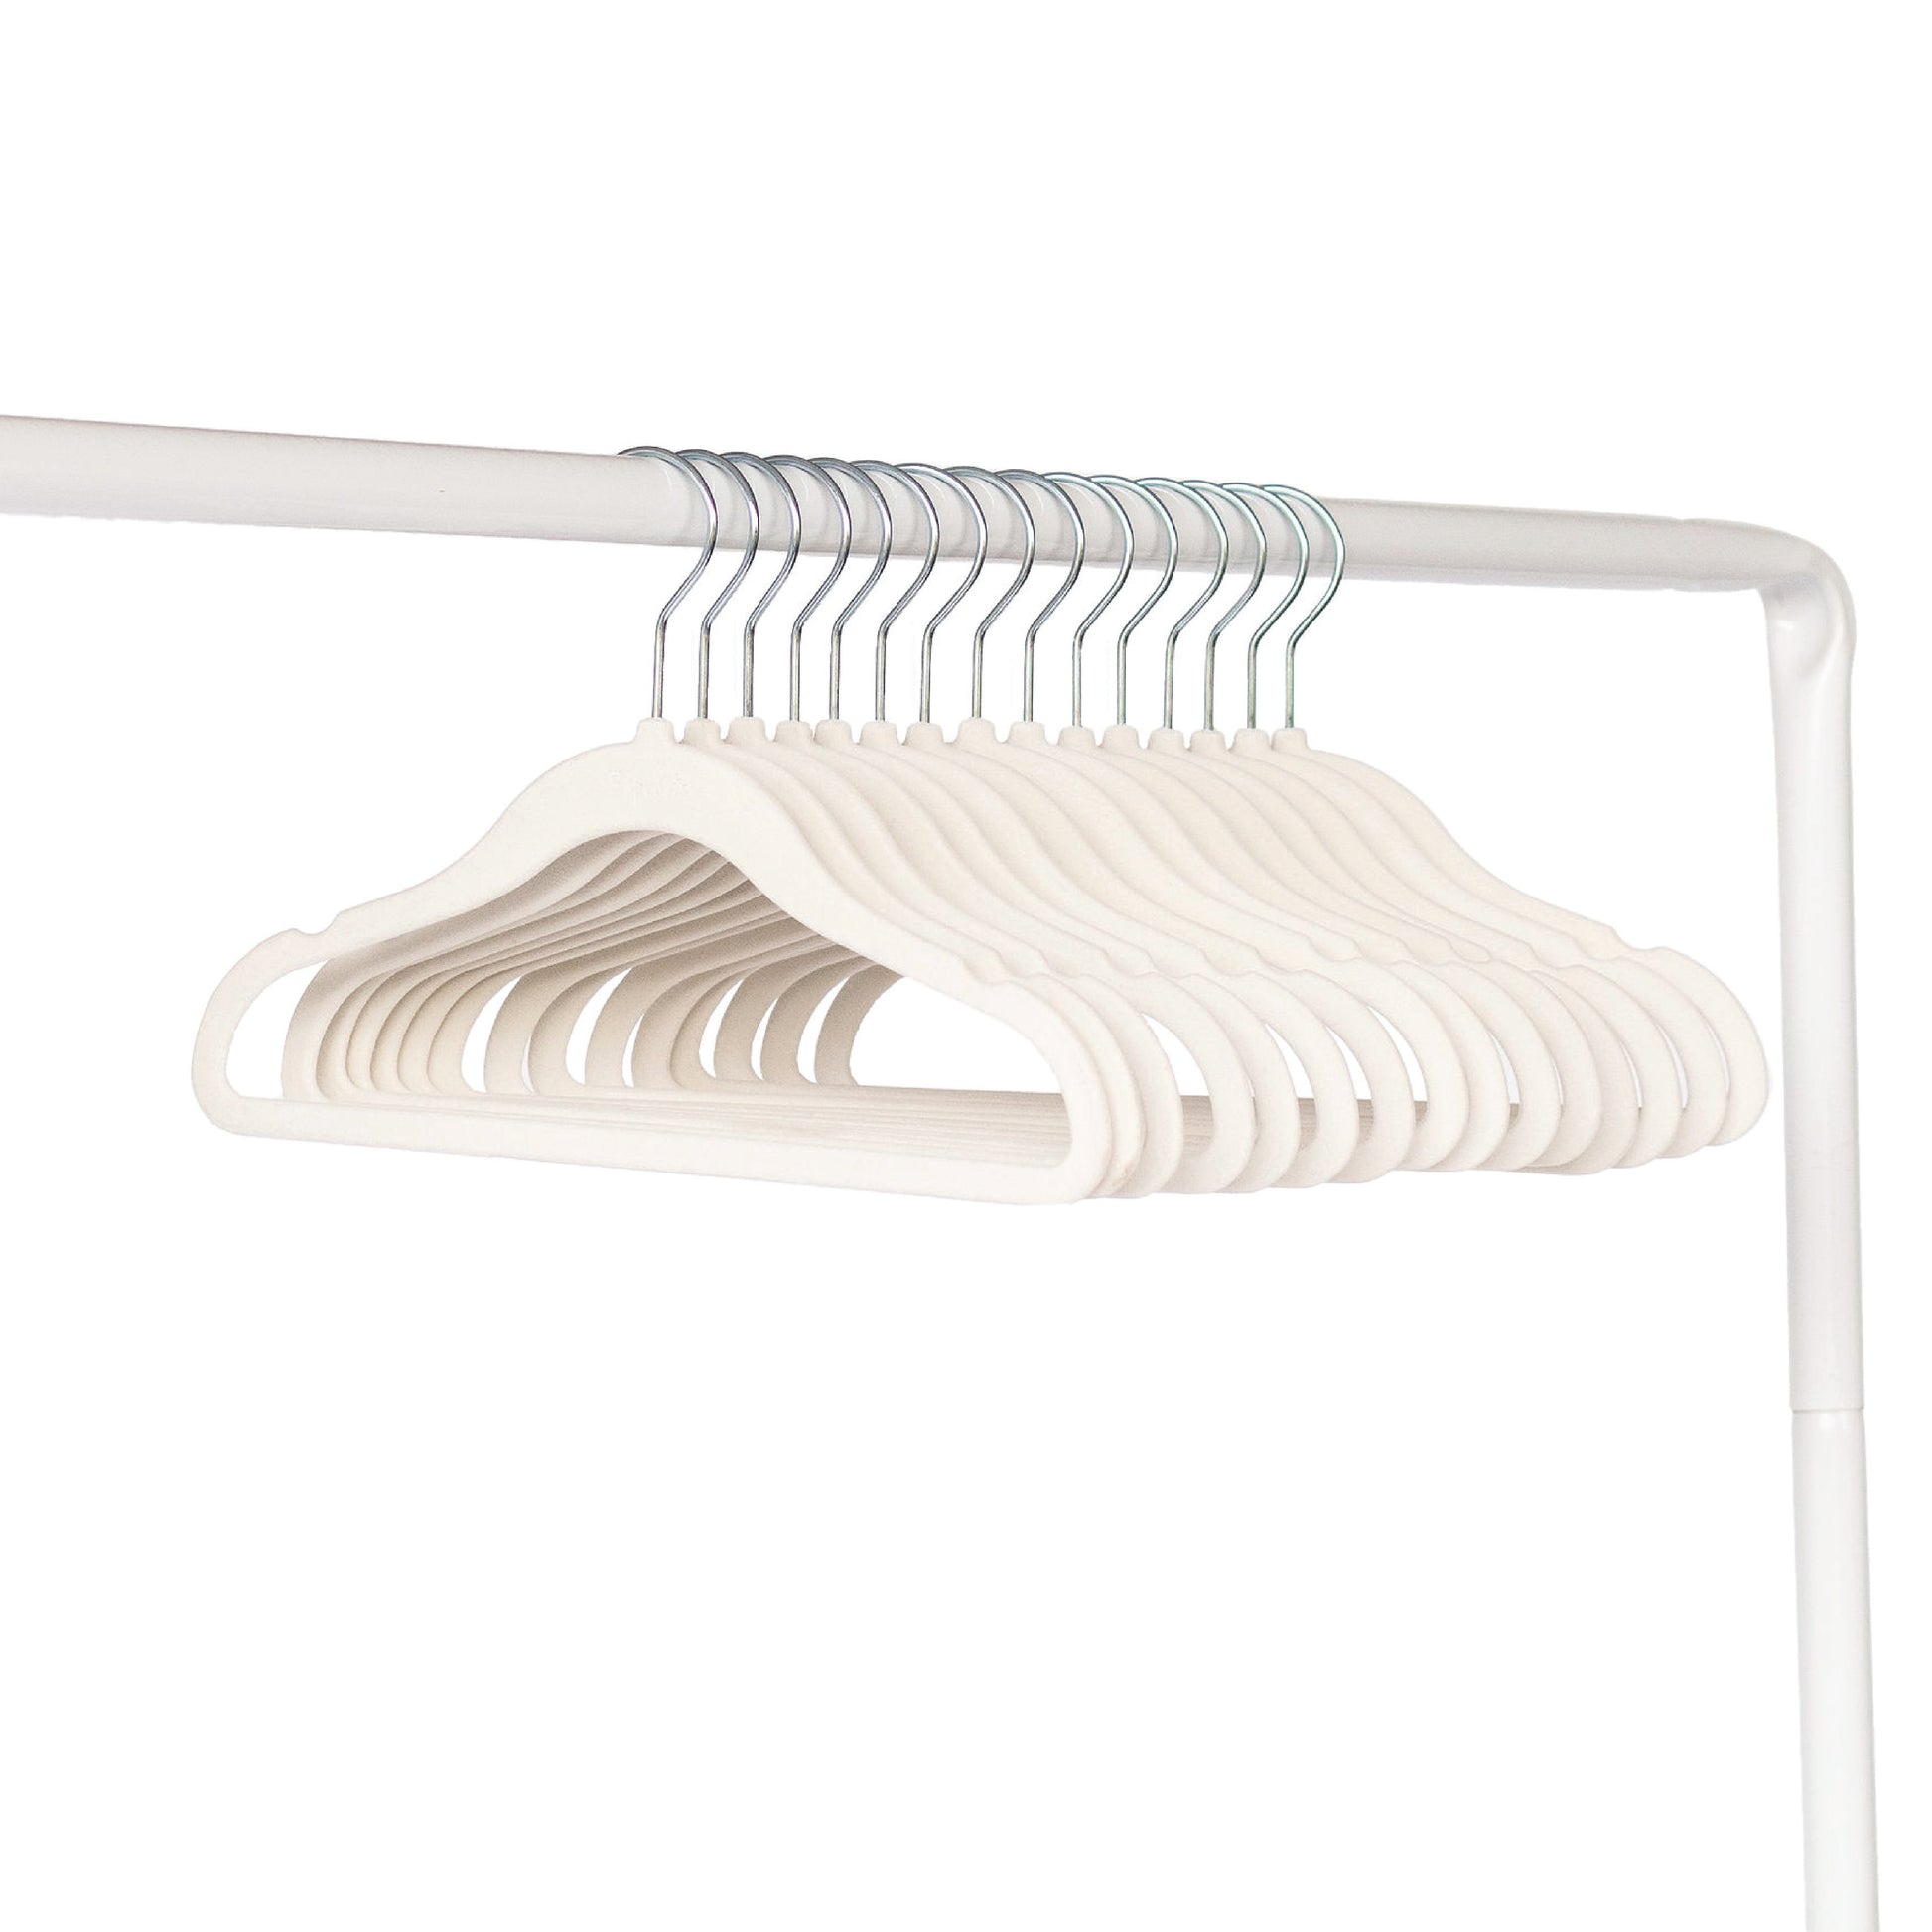 3 Sprouts Hangers - Whale, Blue